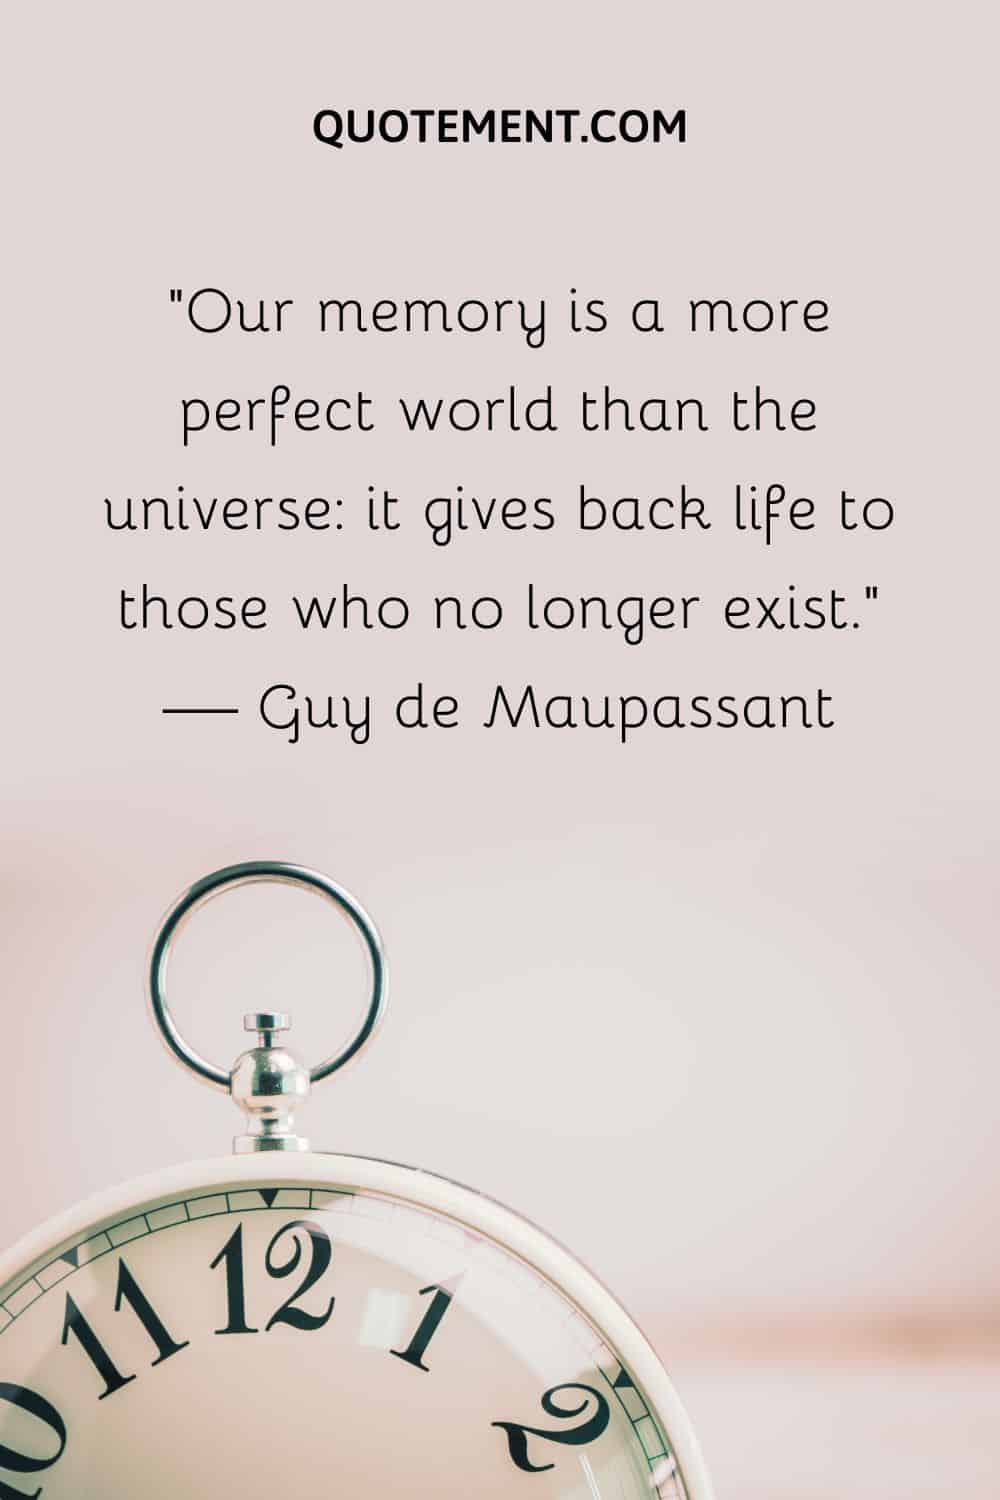 Our memory is a more perfect world than the universe